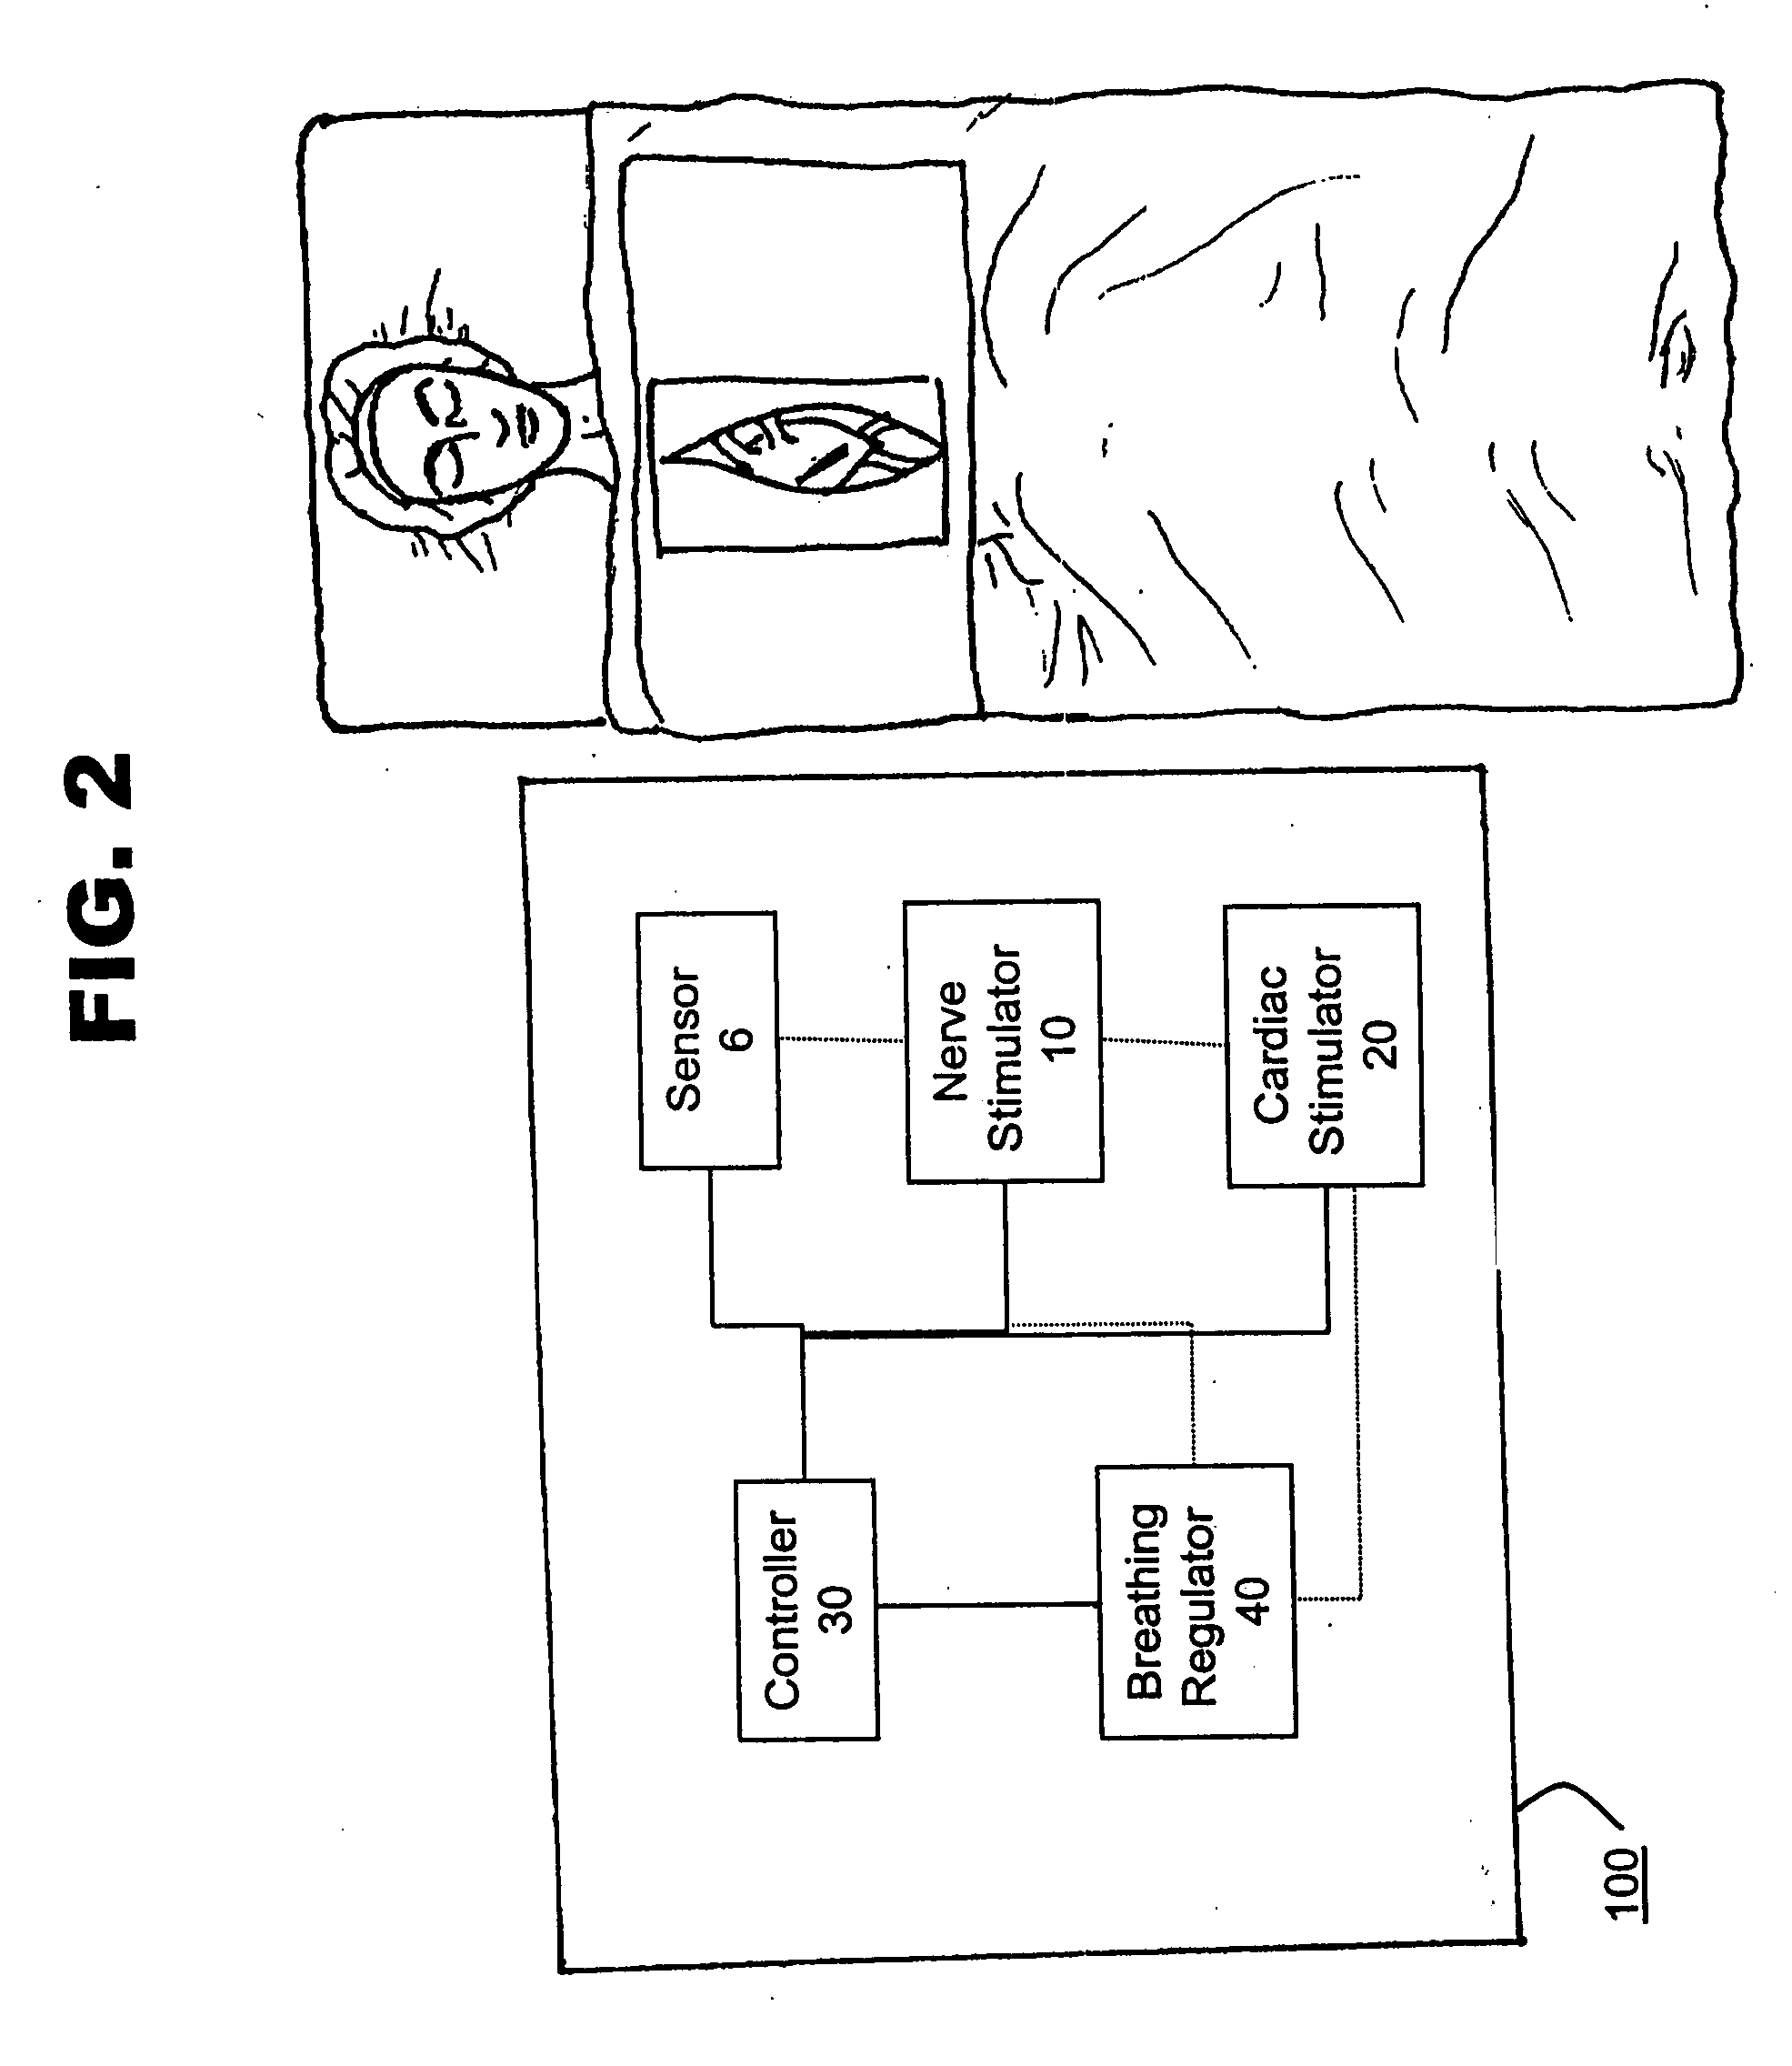 Method and system for nerve stimulation and cardiac sensing prior to and during a medical procedure